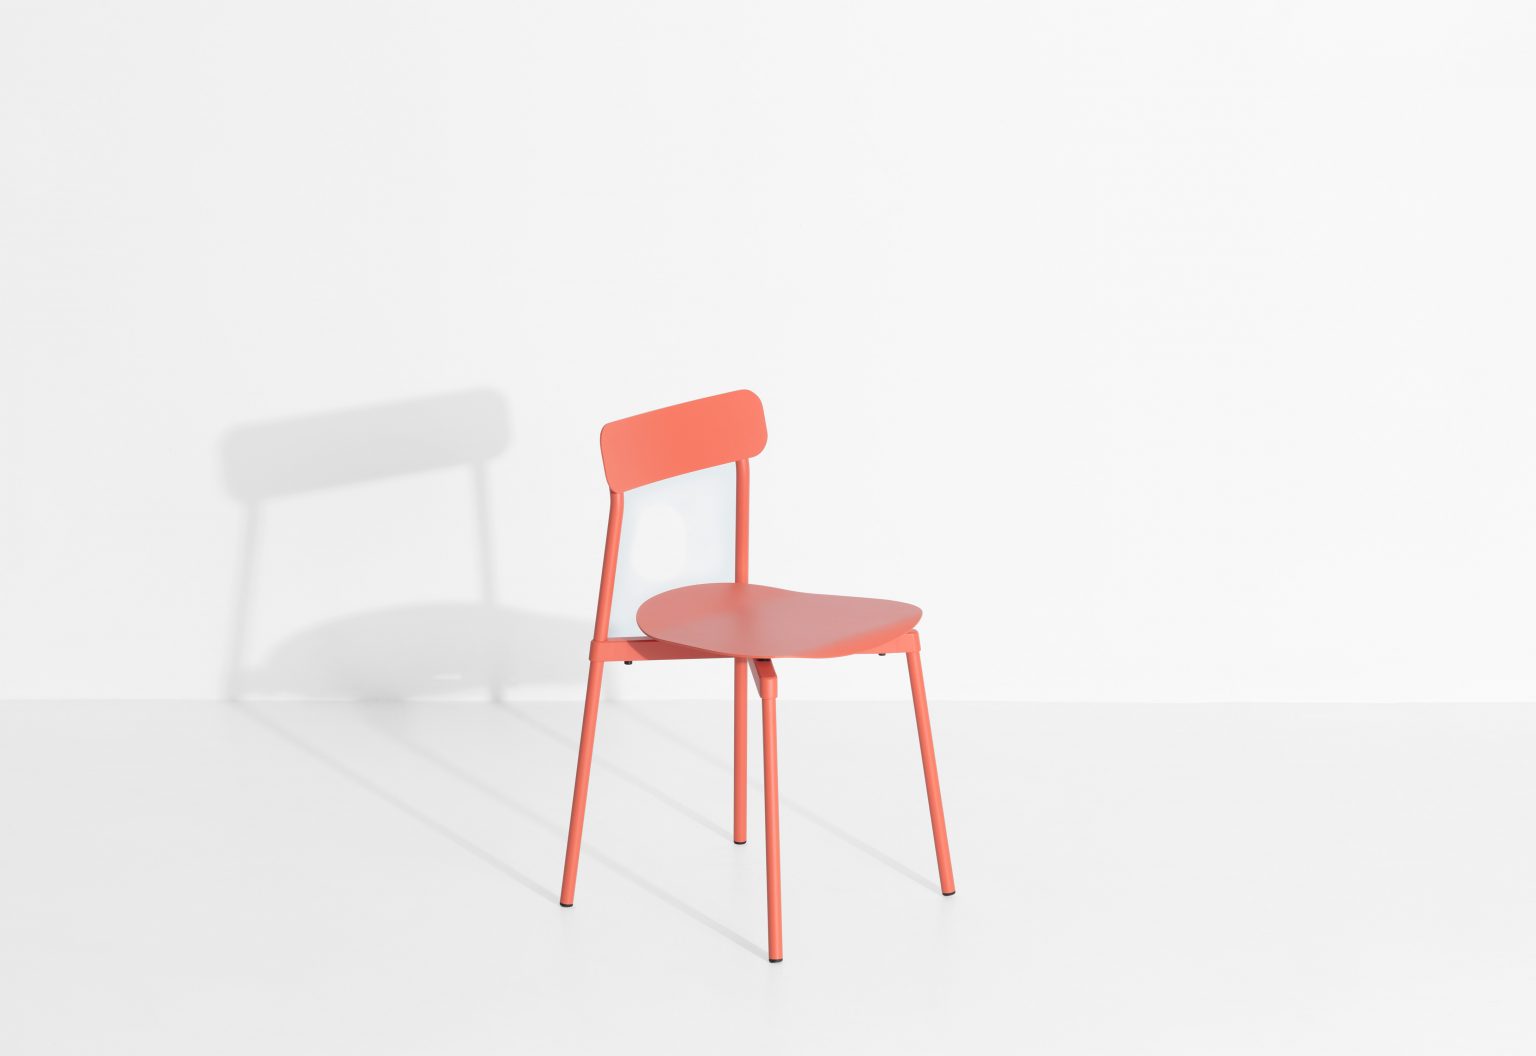 Biennale Interieur - Belgium's leading design and interior event - M0810105_fromme_chair_coral_©pf_packshot_hd-4.jpg